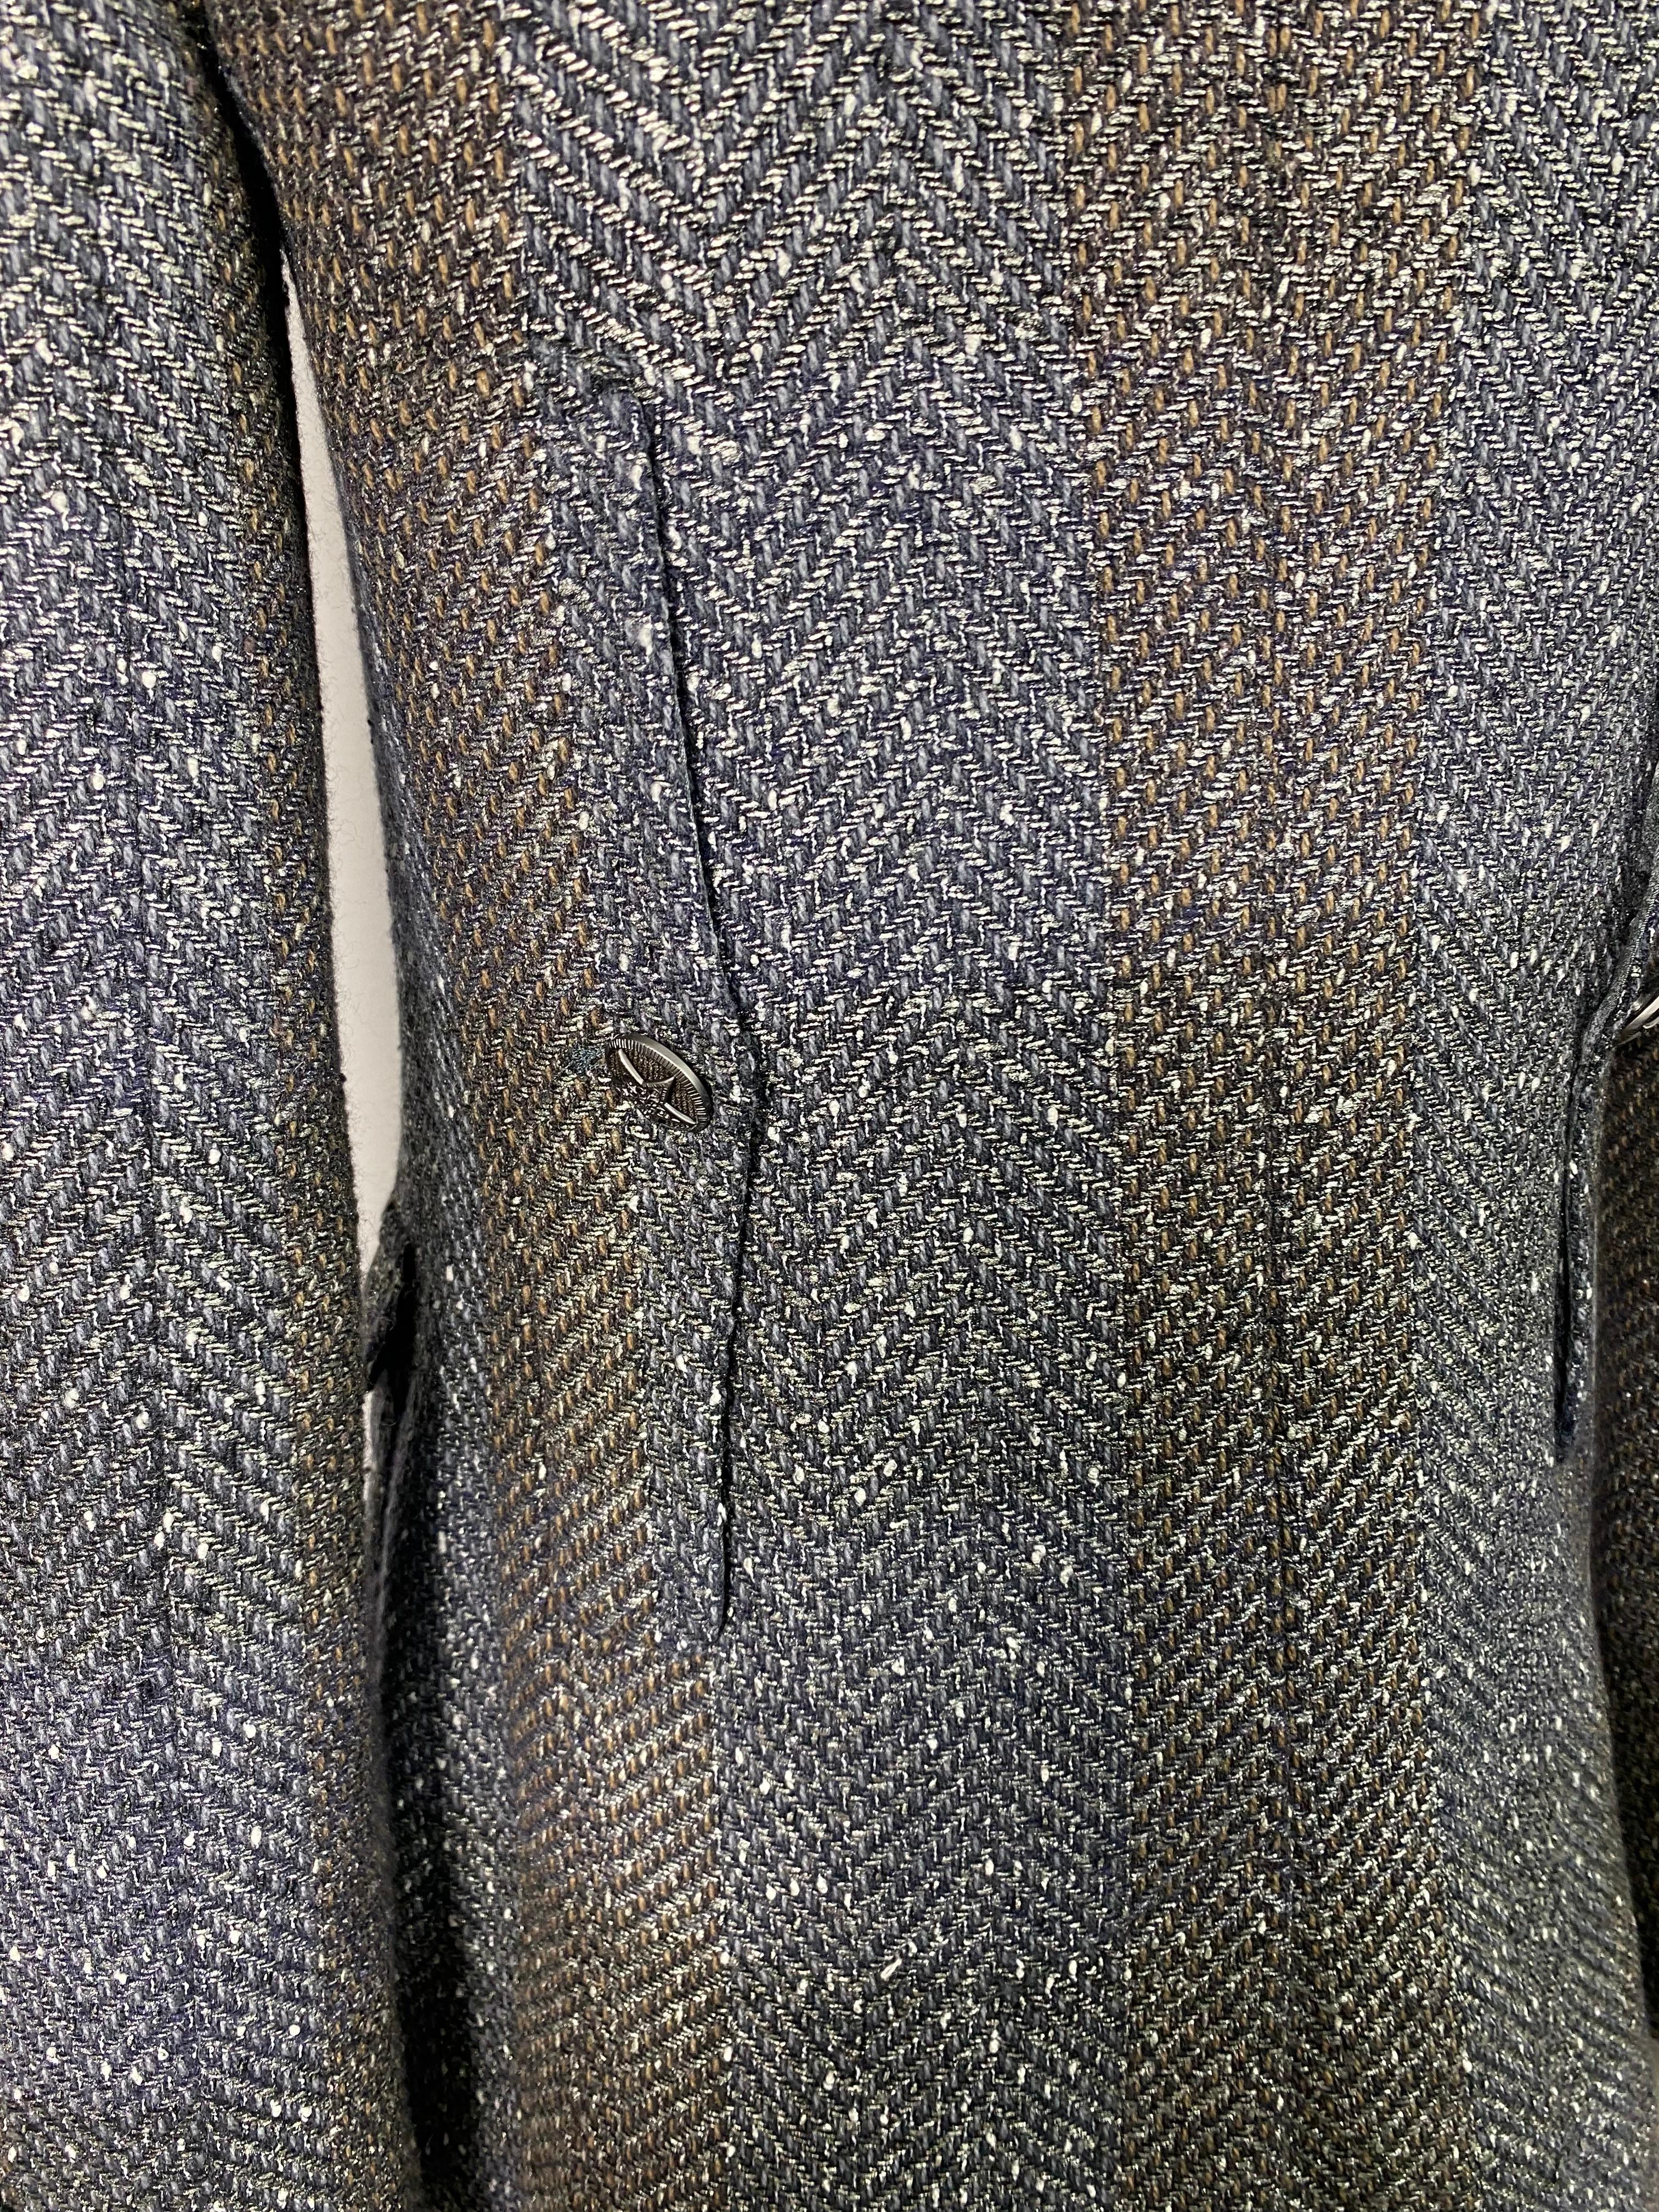 Chanel Fall 2007 Grey and Metallic Double Breasted Jacket - Size 34 For Sale 8